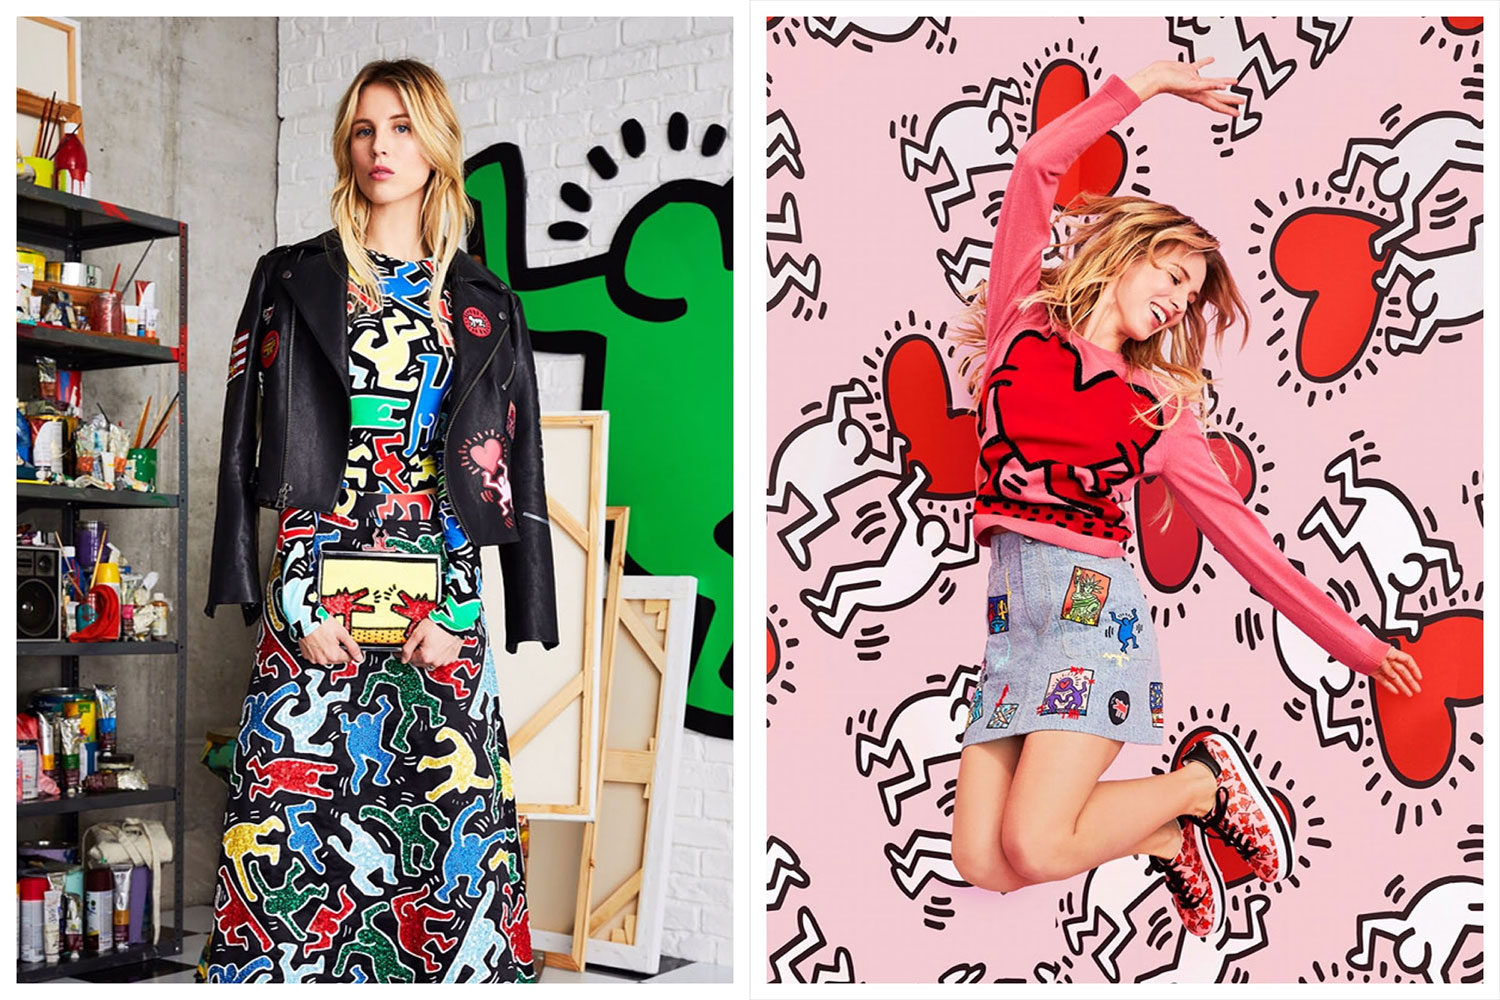 nghe sy pop art keith haring alice olivia 2019